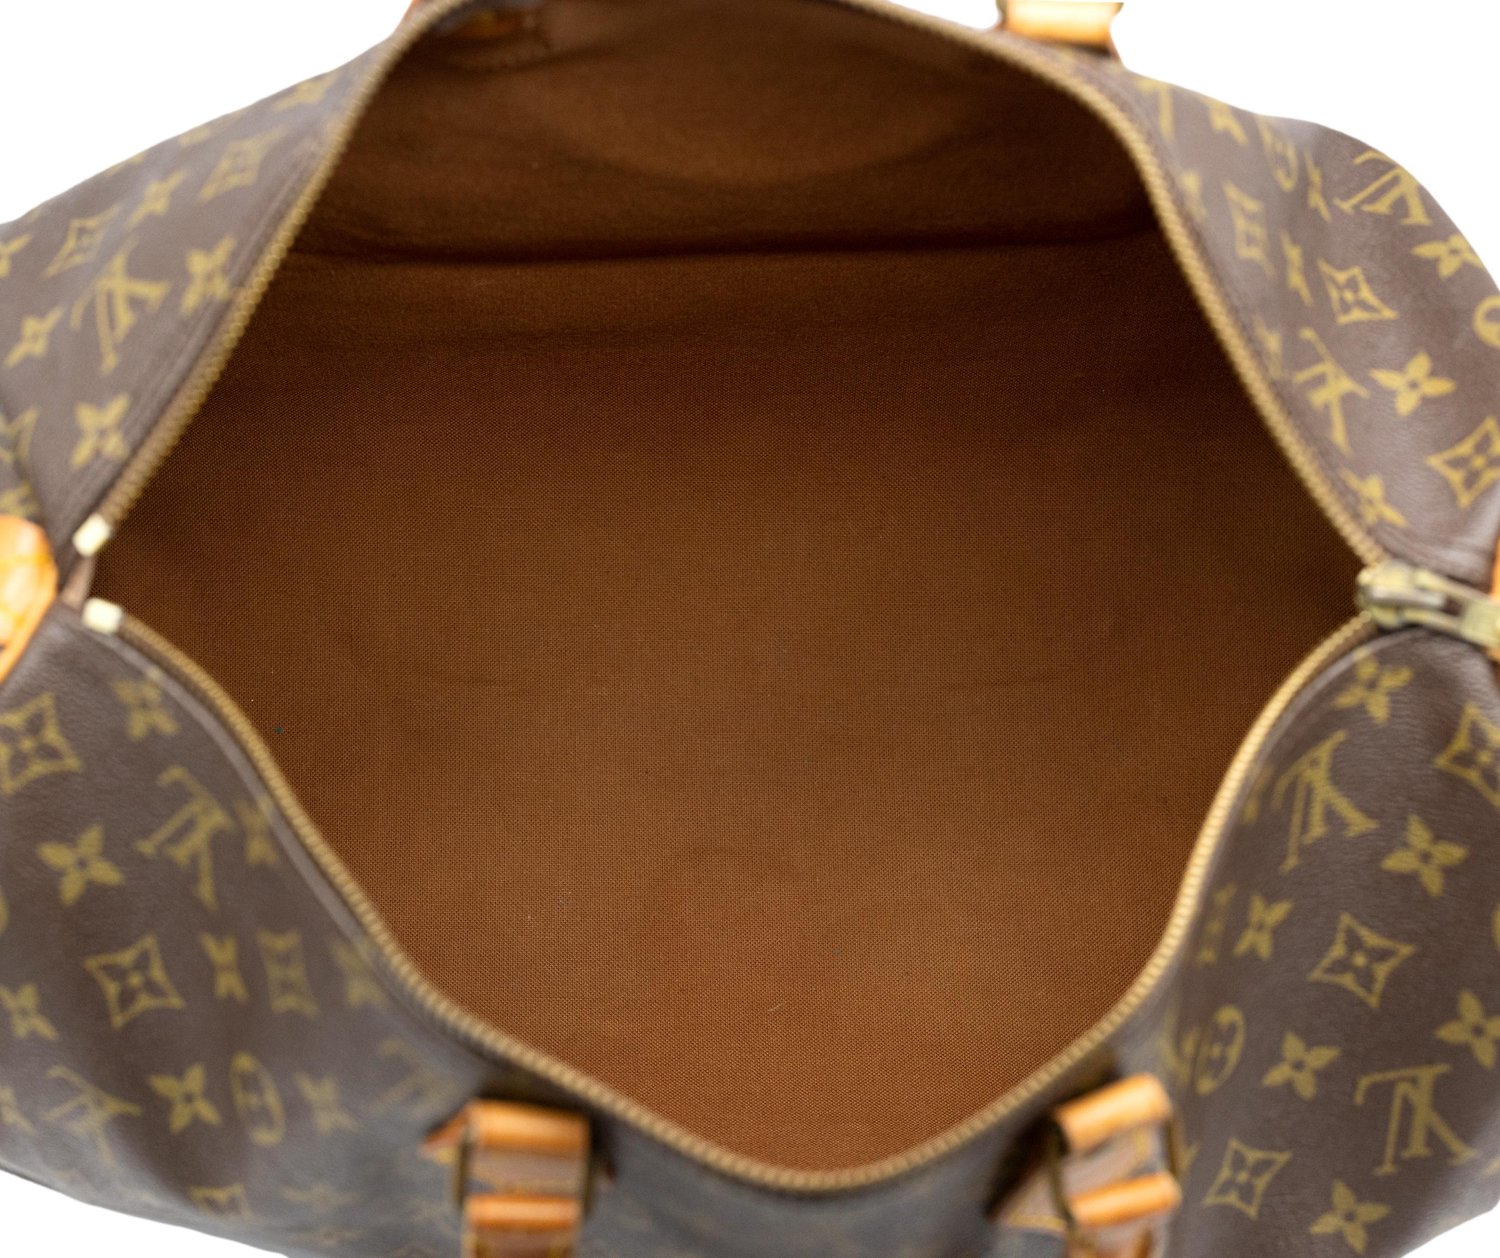 SOLD-Vintage Louis Vuitton French Company Speedy